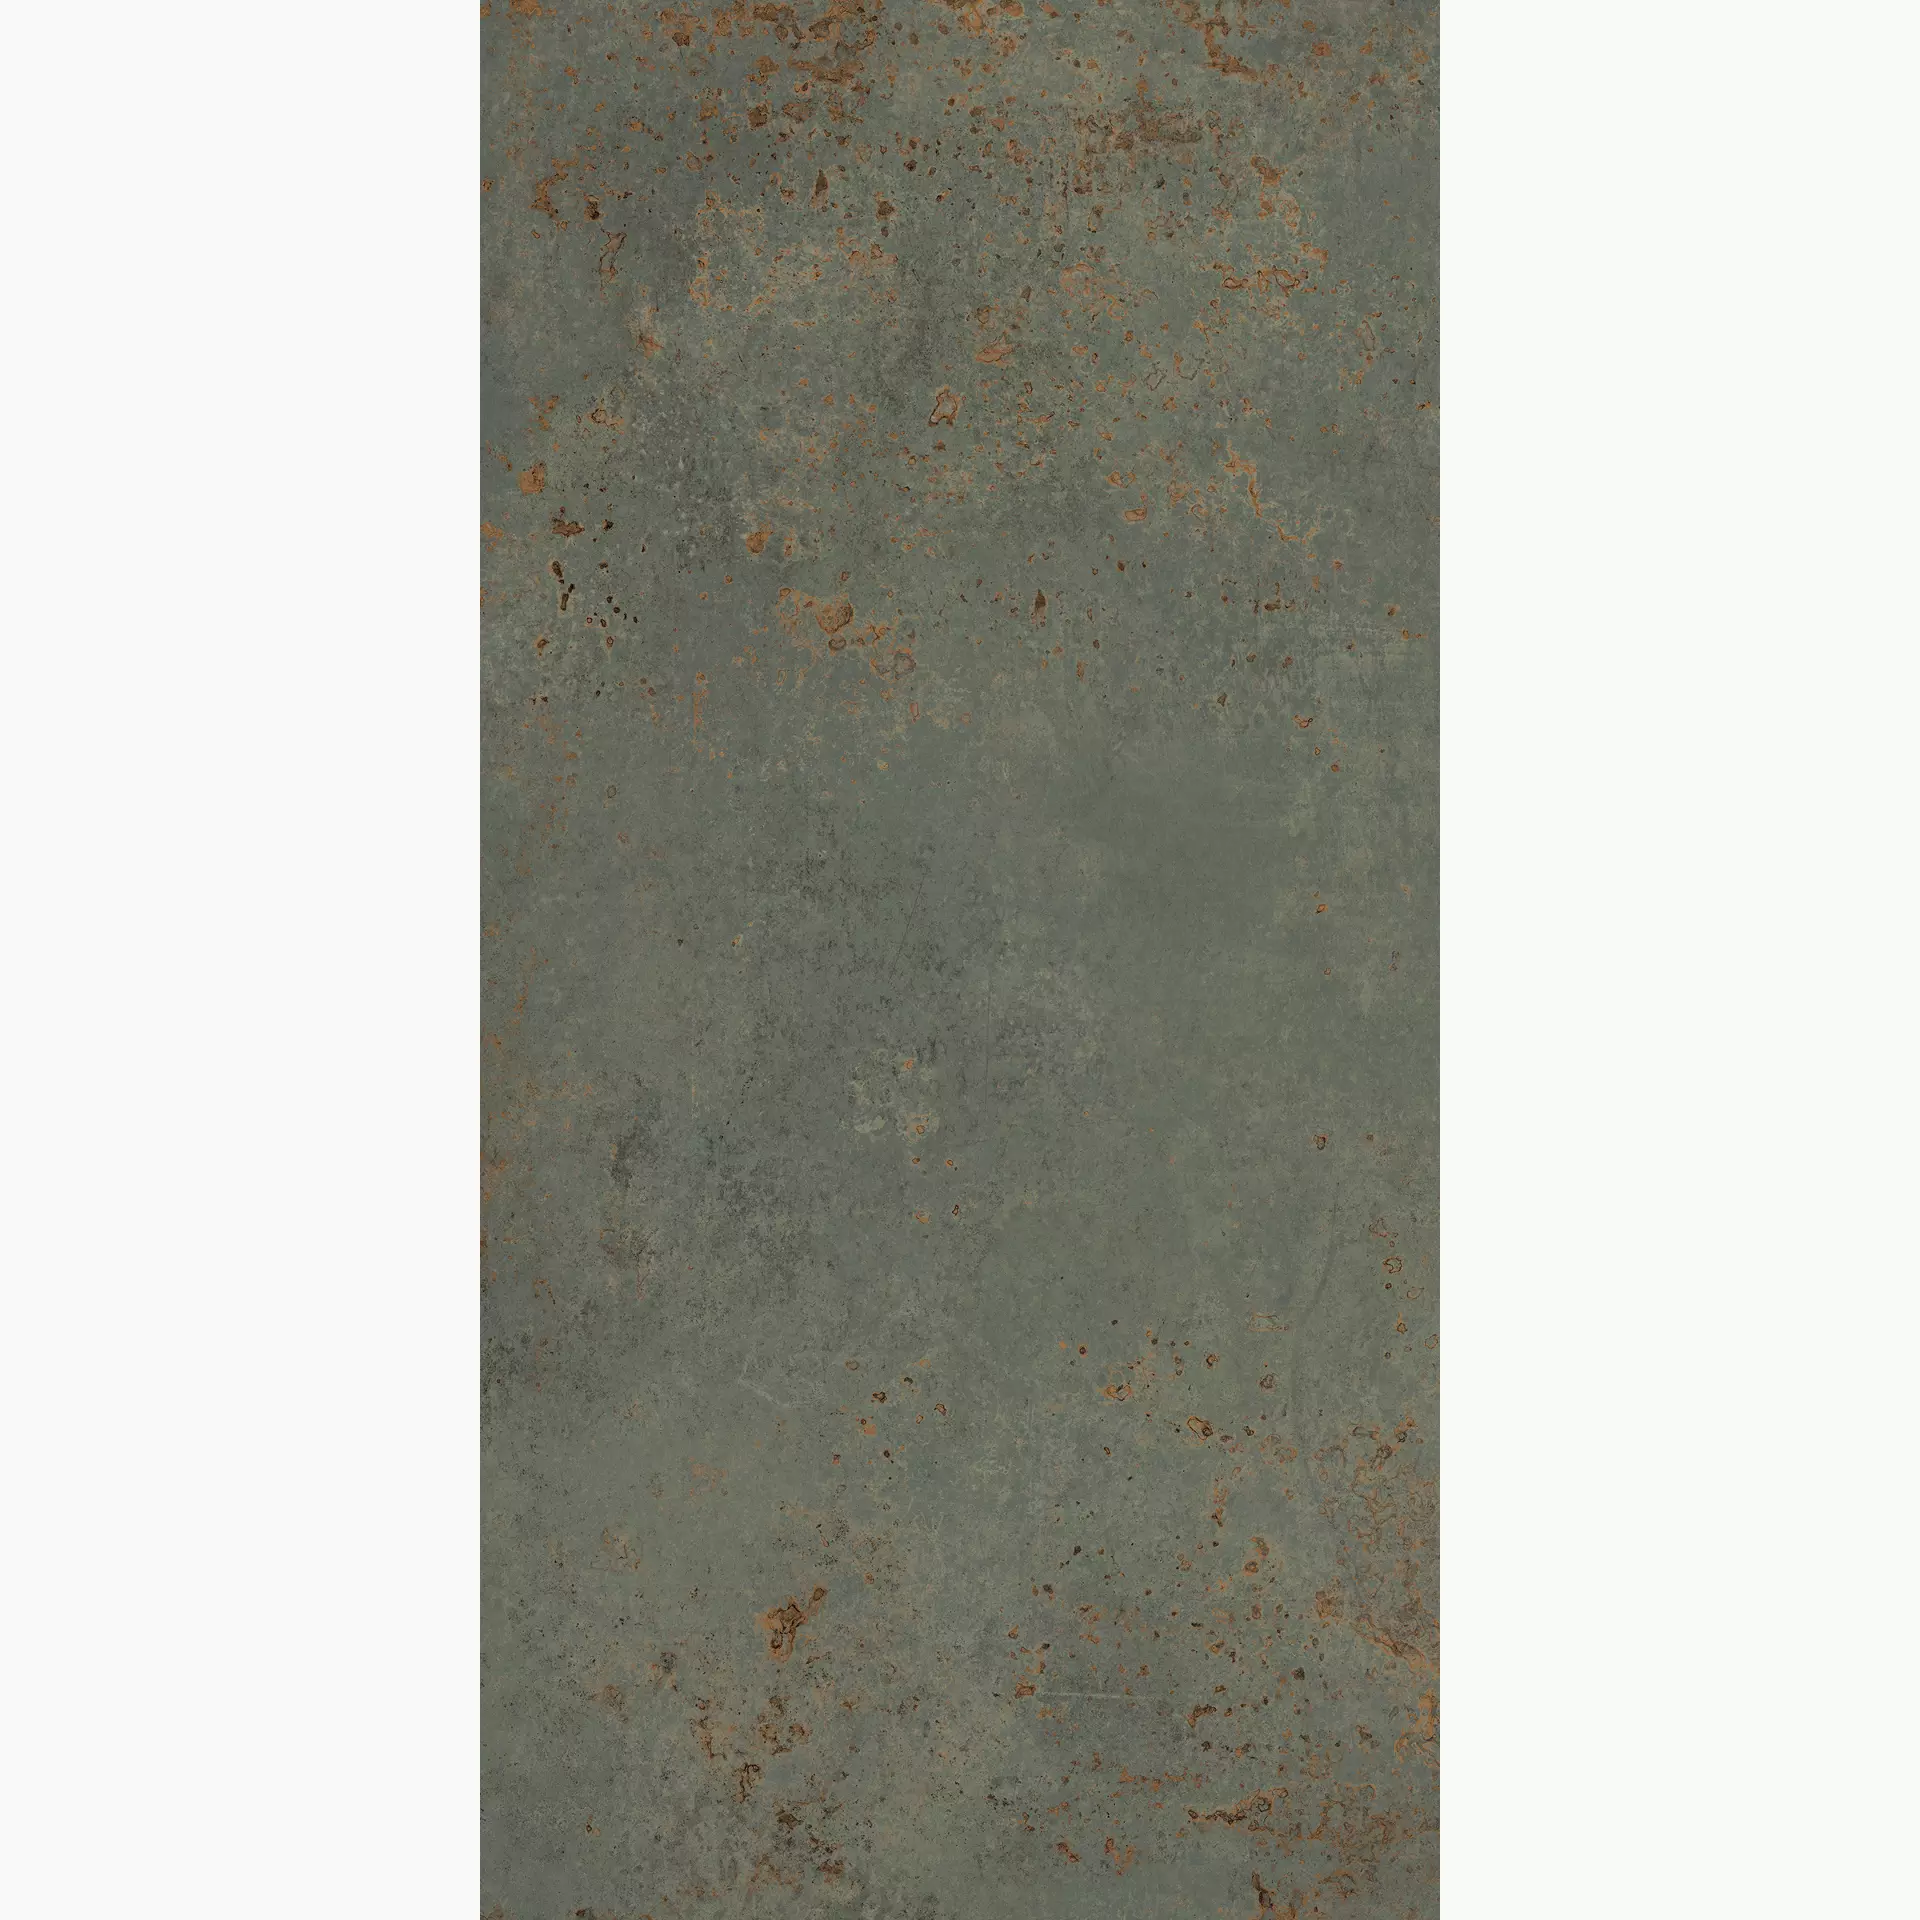 Tagina Metal Oxide Naturale 124093 60x120cm rectified 10mm